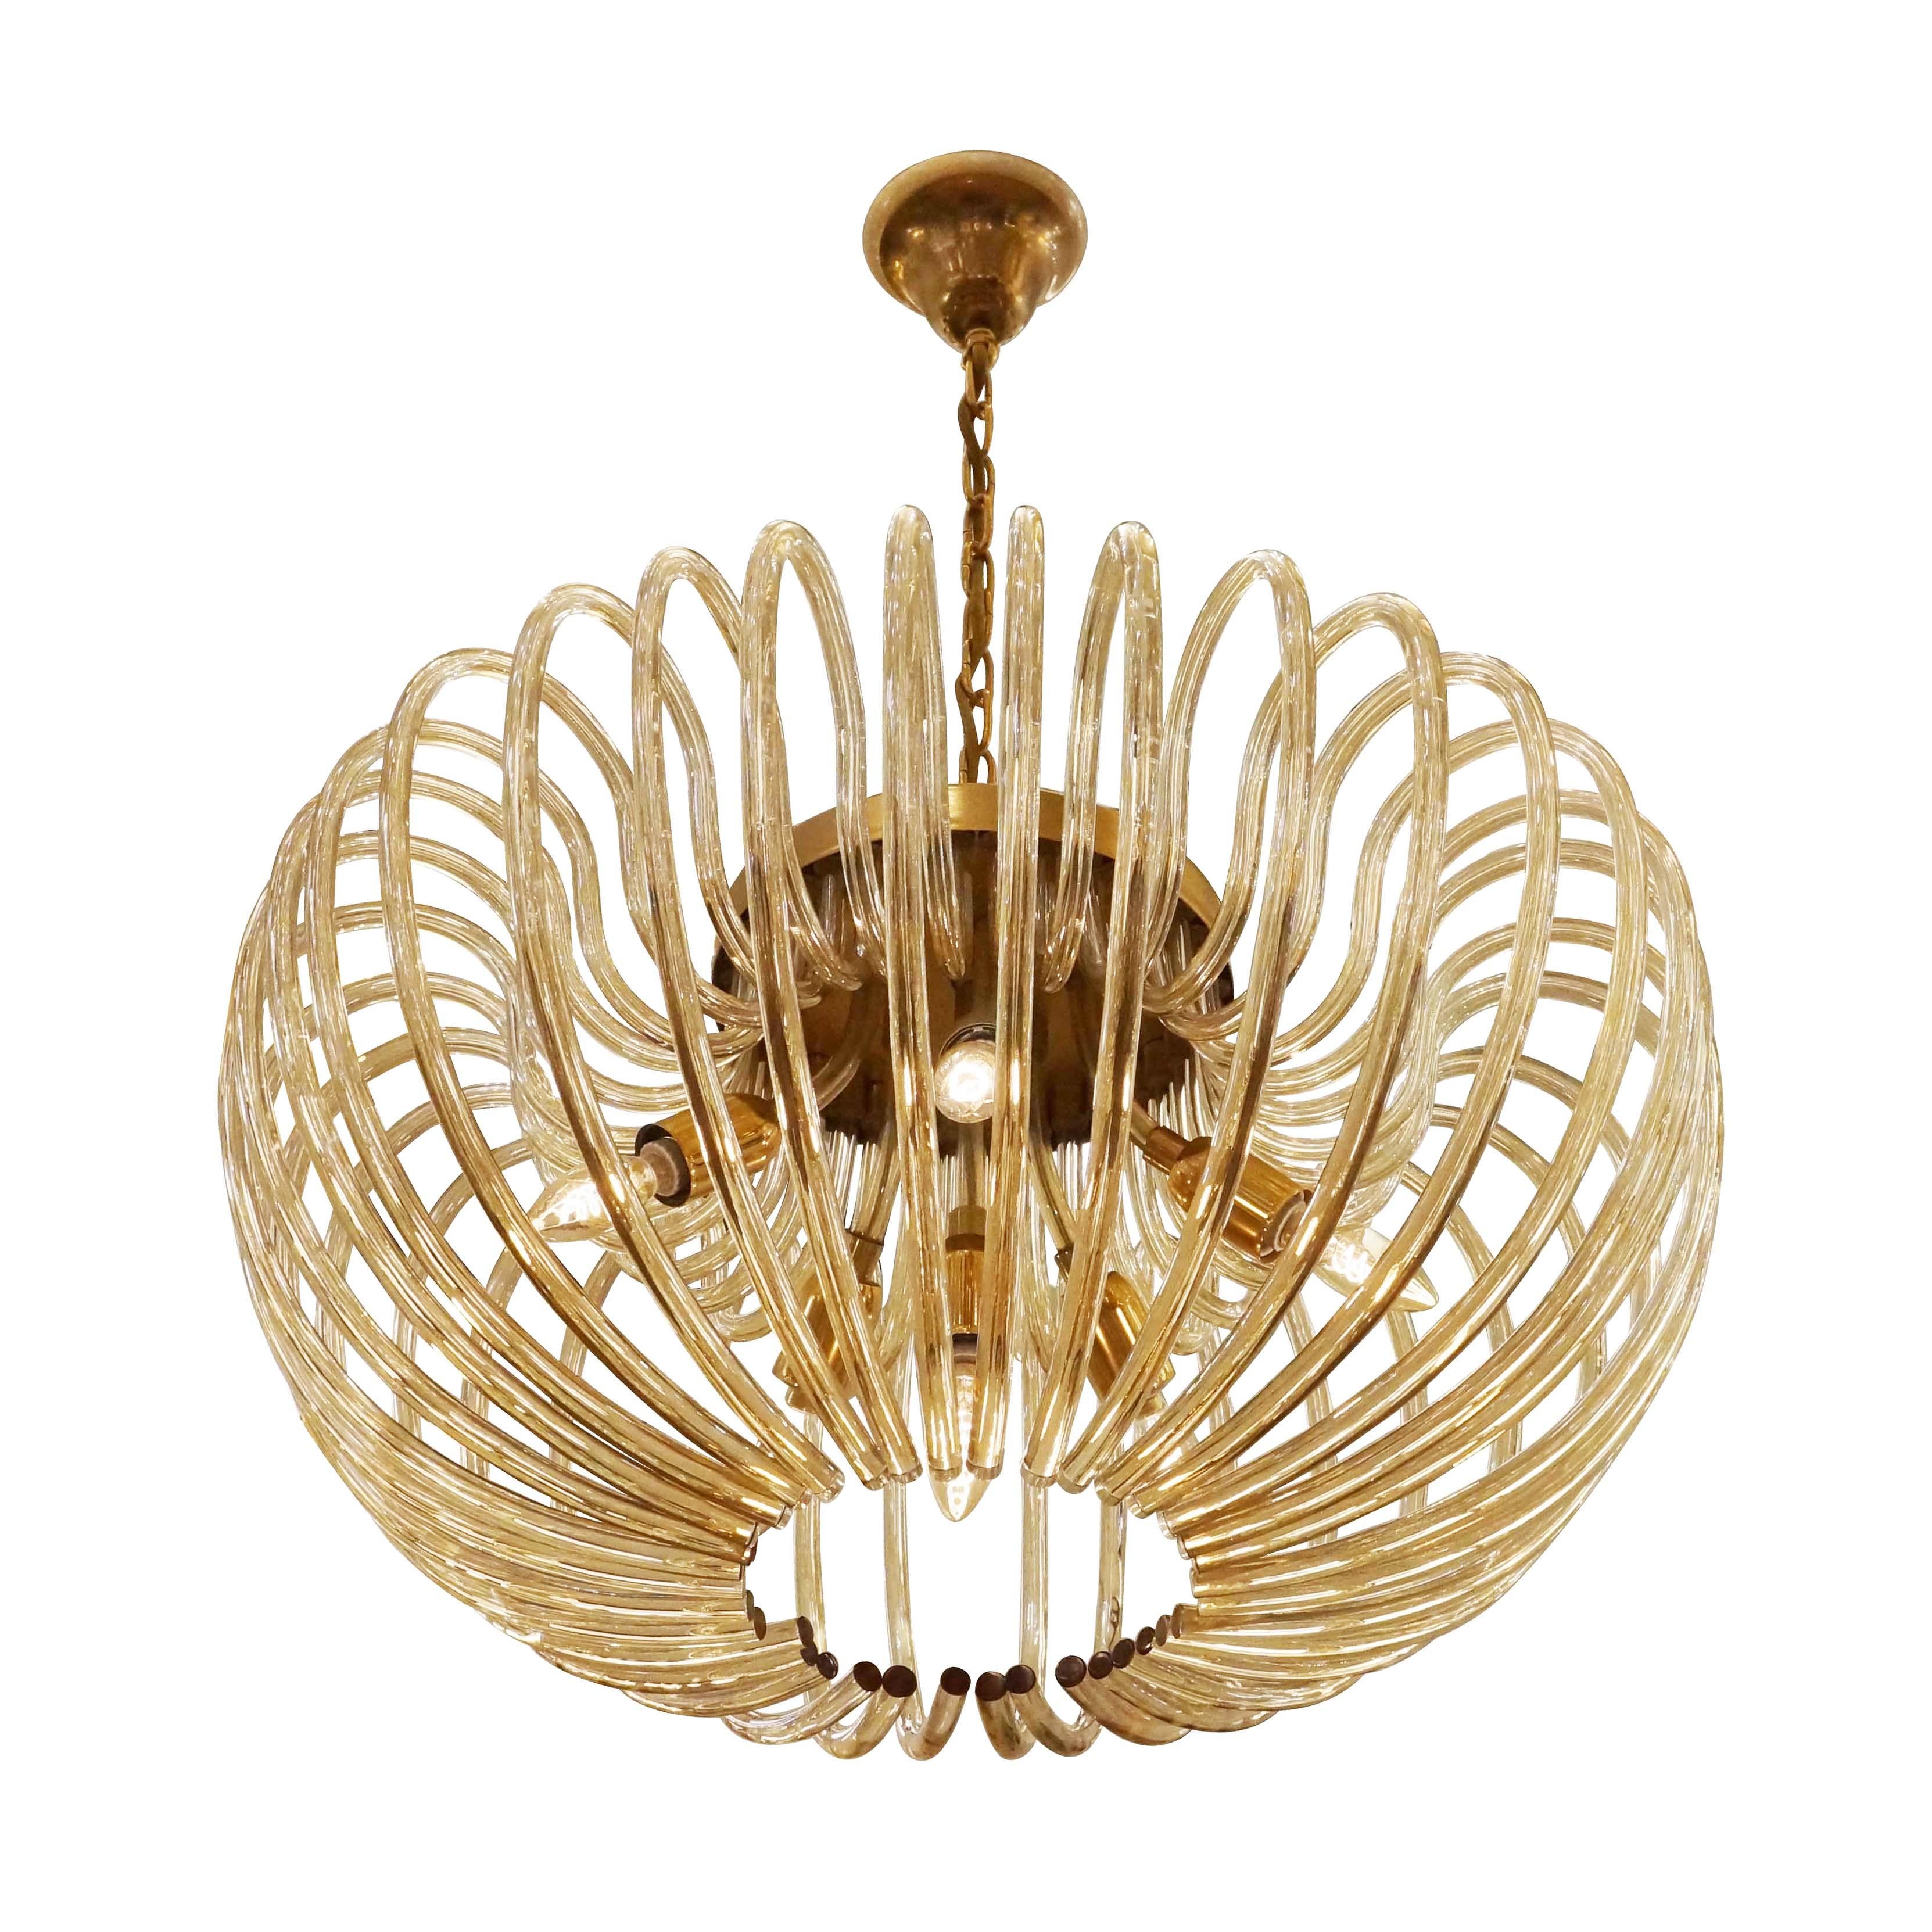 1960’s Italian Murano chandelier with dozens of curved “champagne” colored glasses. Brass hardware. Holds six light sources.

Condition: Excellent vintage condition, minor wear consistent with age and use.

Diameter: 29”

Height: 37” (adjustable)